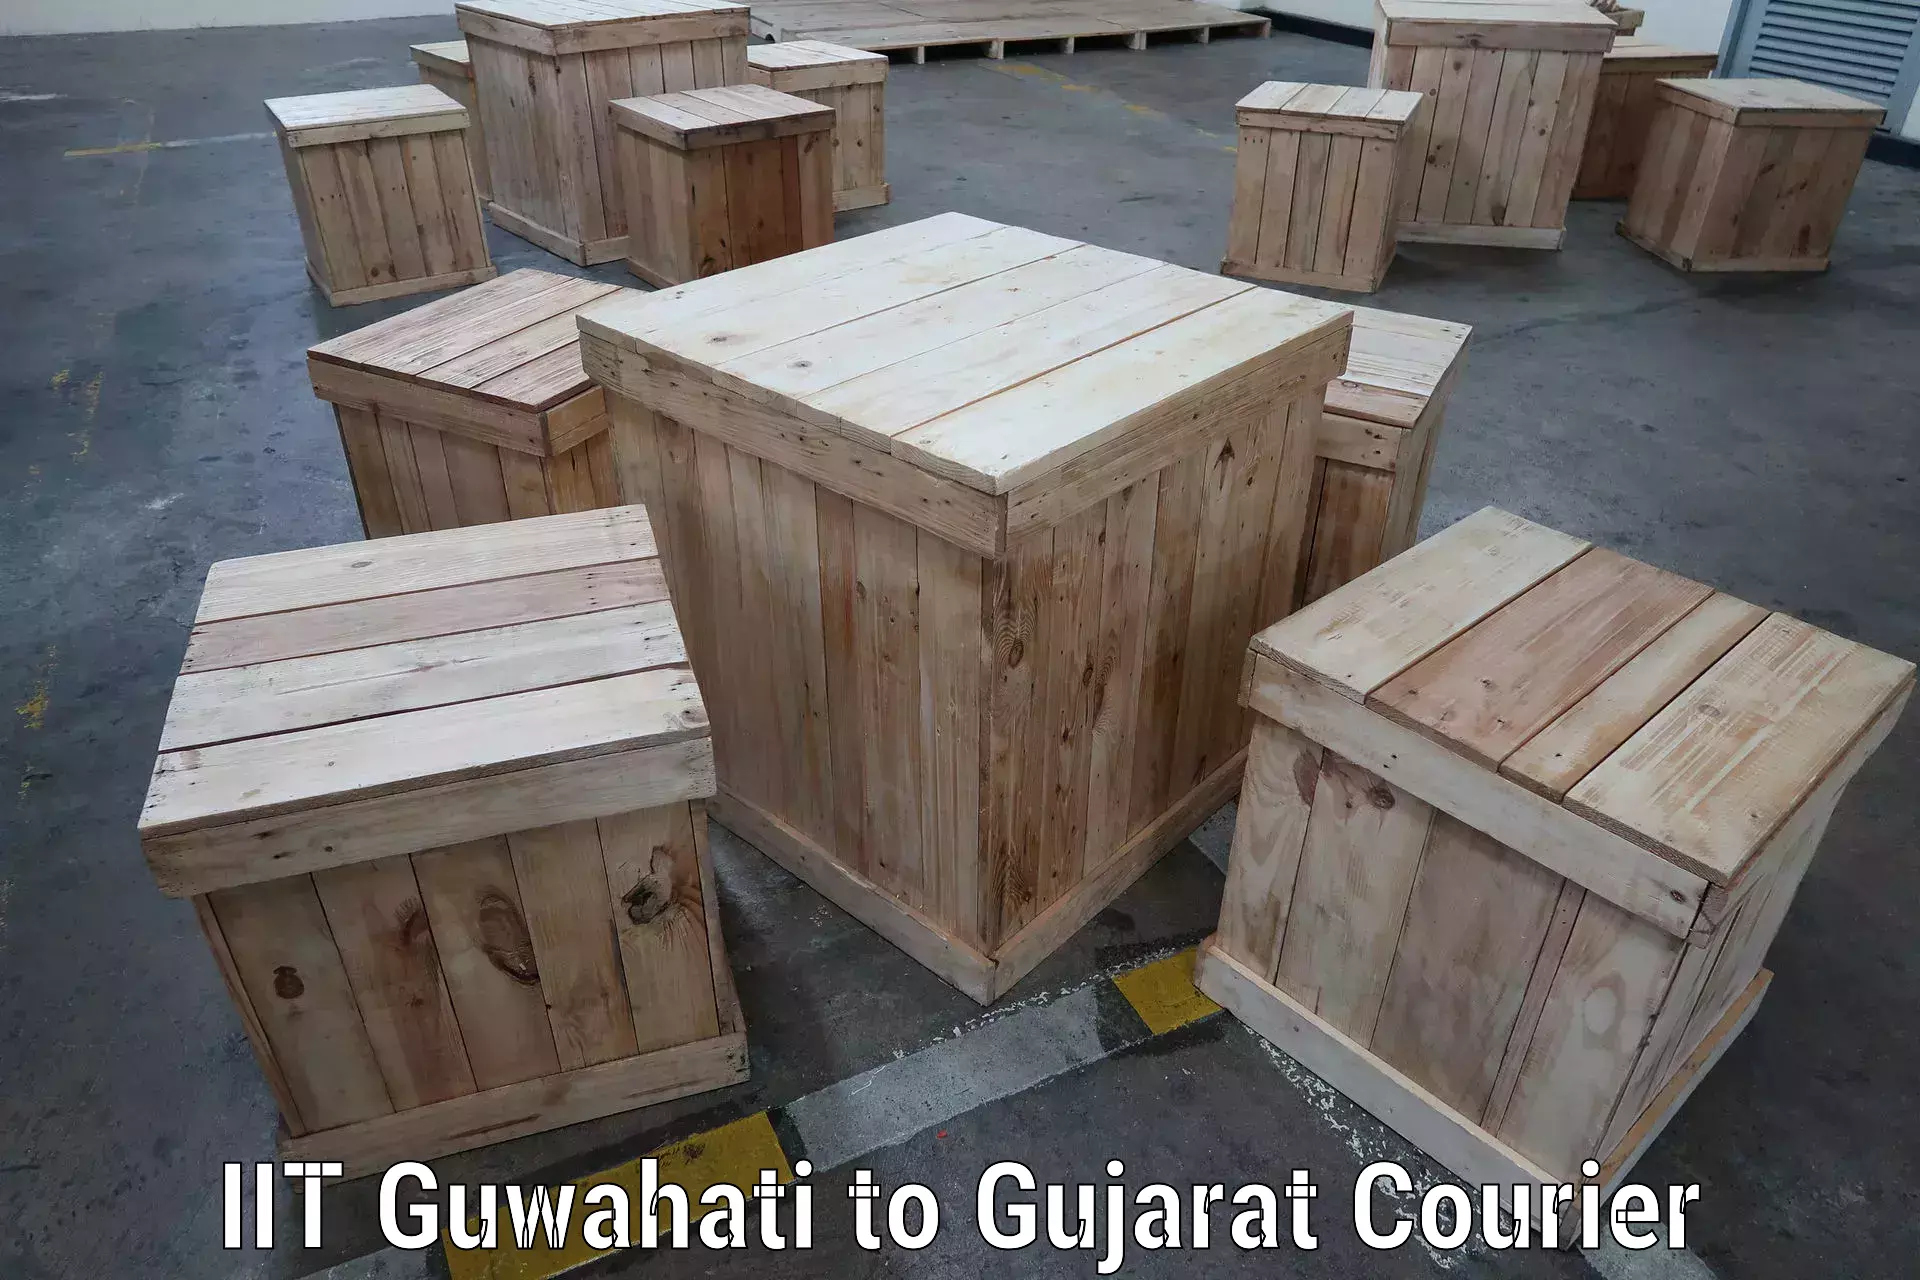 Supply chain delivery in IIT Guwahati to Gujarat